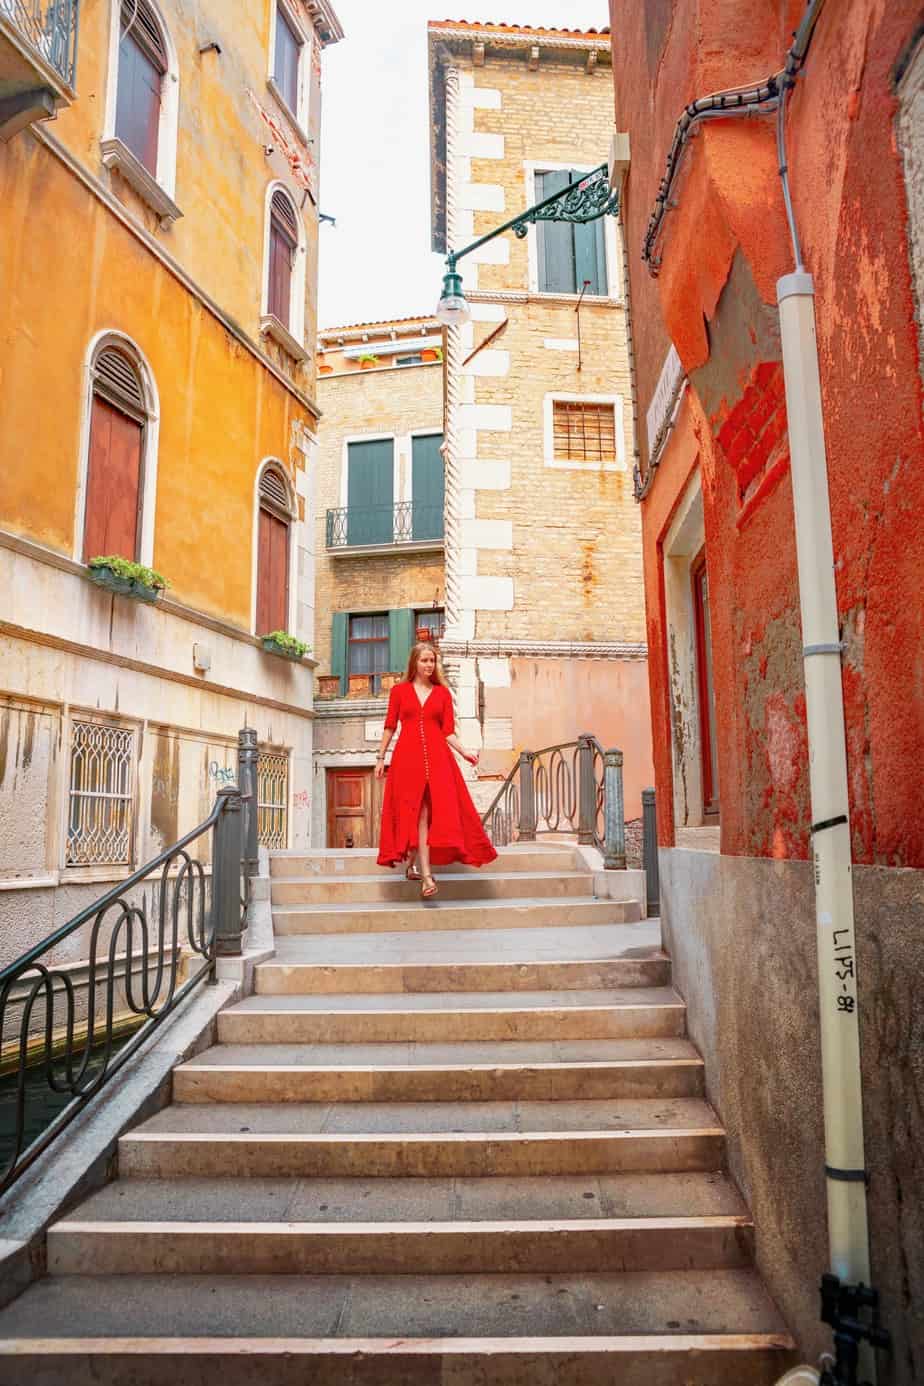 Crossing a bridge in Venice makes for a great Instagram photo | pretty instagrammable places in Venice Italy | unique places to see in Venice